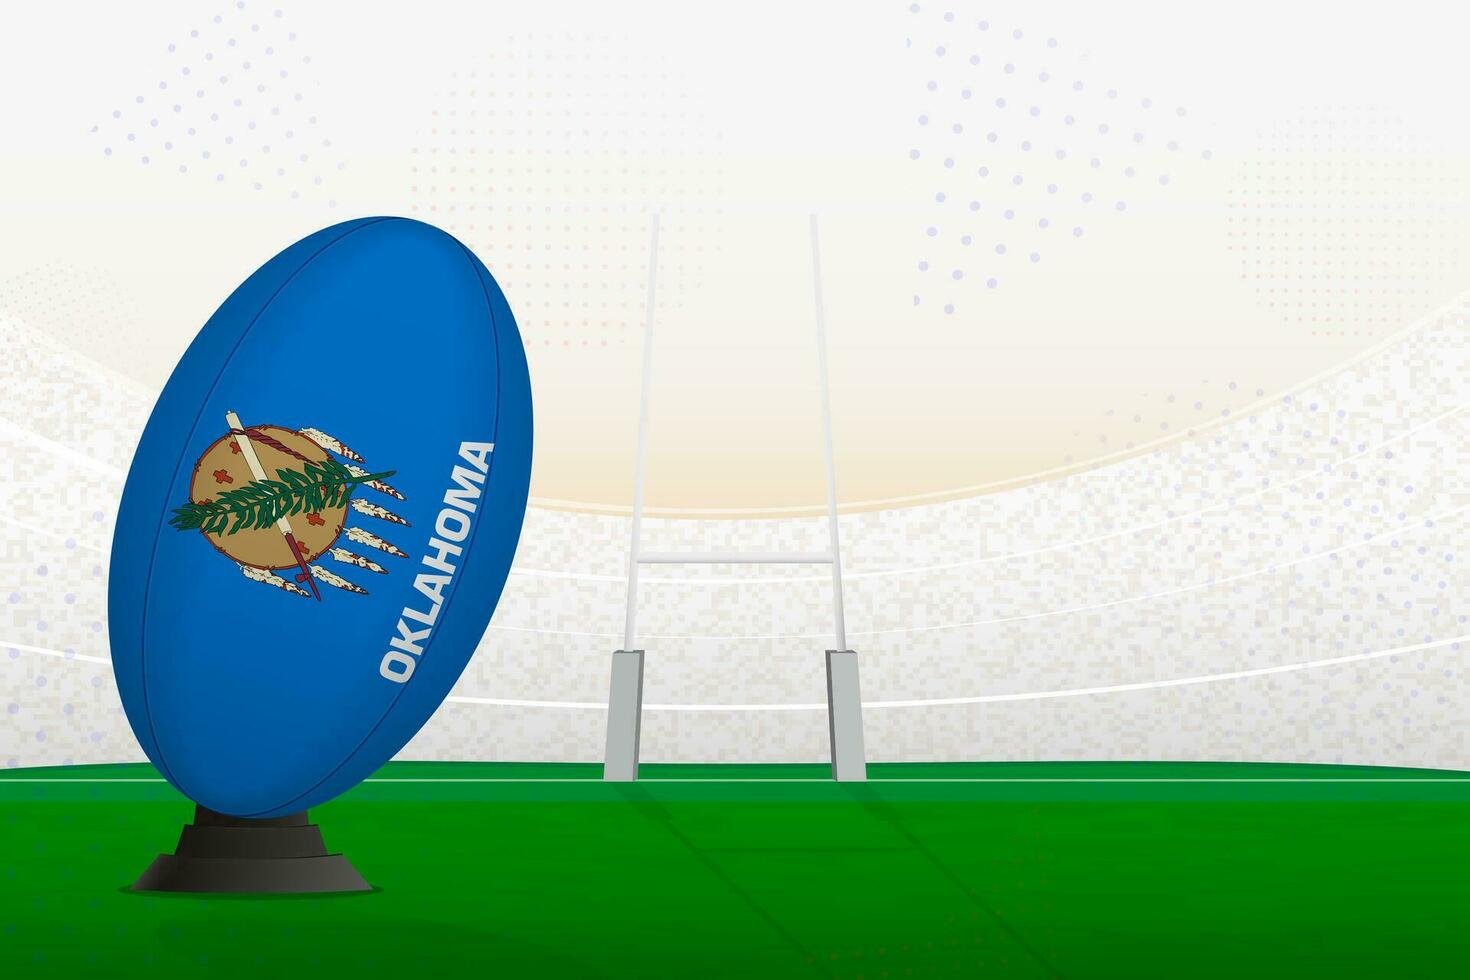 Oklahoma national team rugby ball on rugby stadium and goal posts, preparing for a penalty or free kick. vector